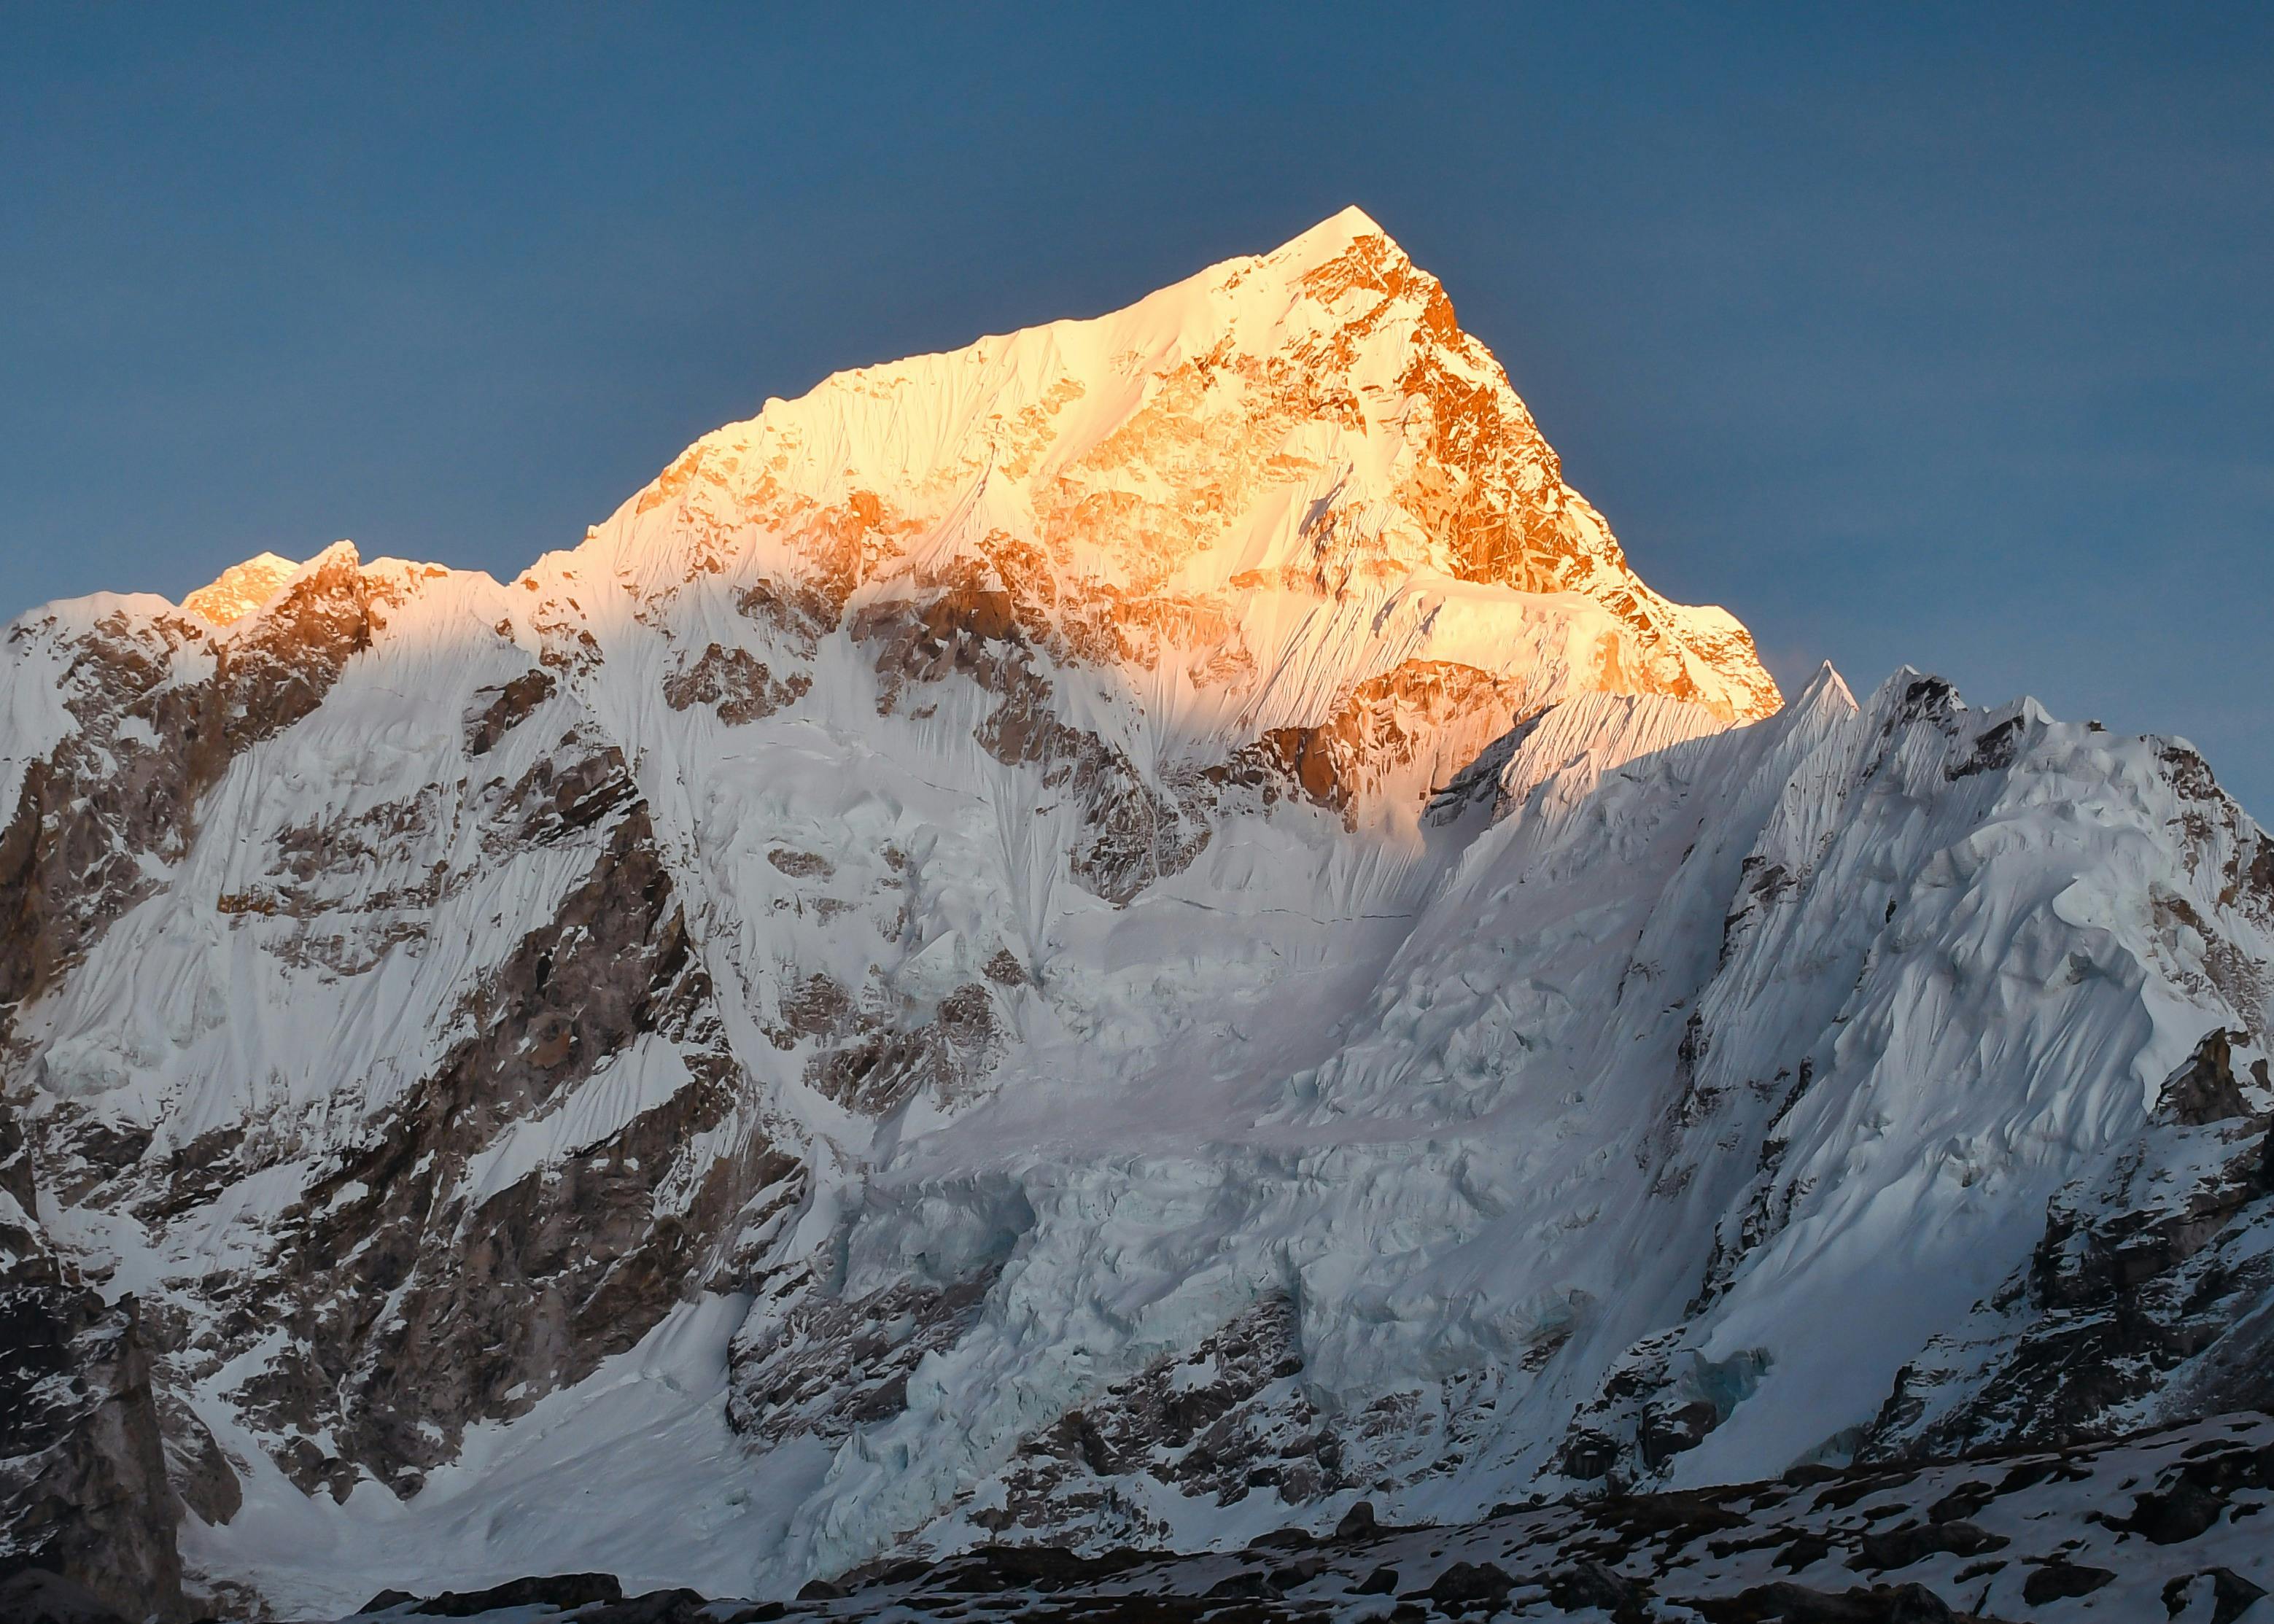 Trekking in the Himalayas: A Majestic Adventure to Remember